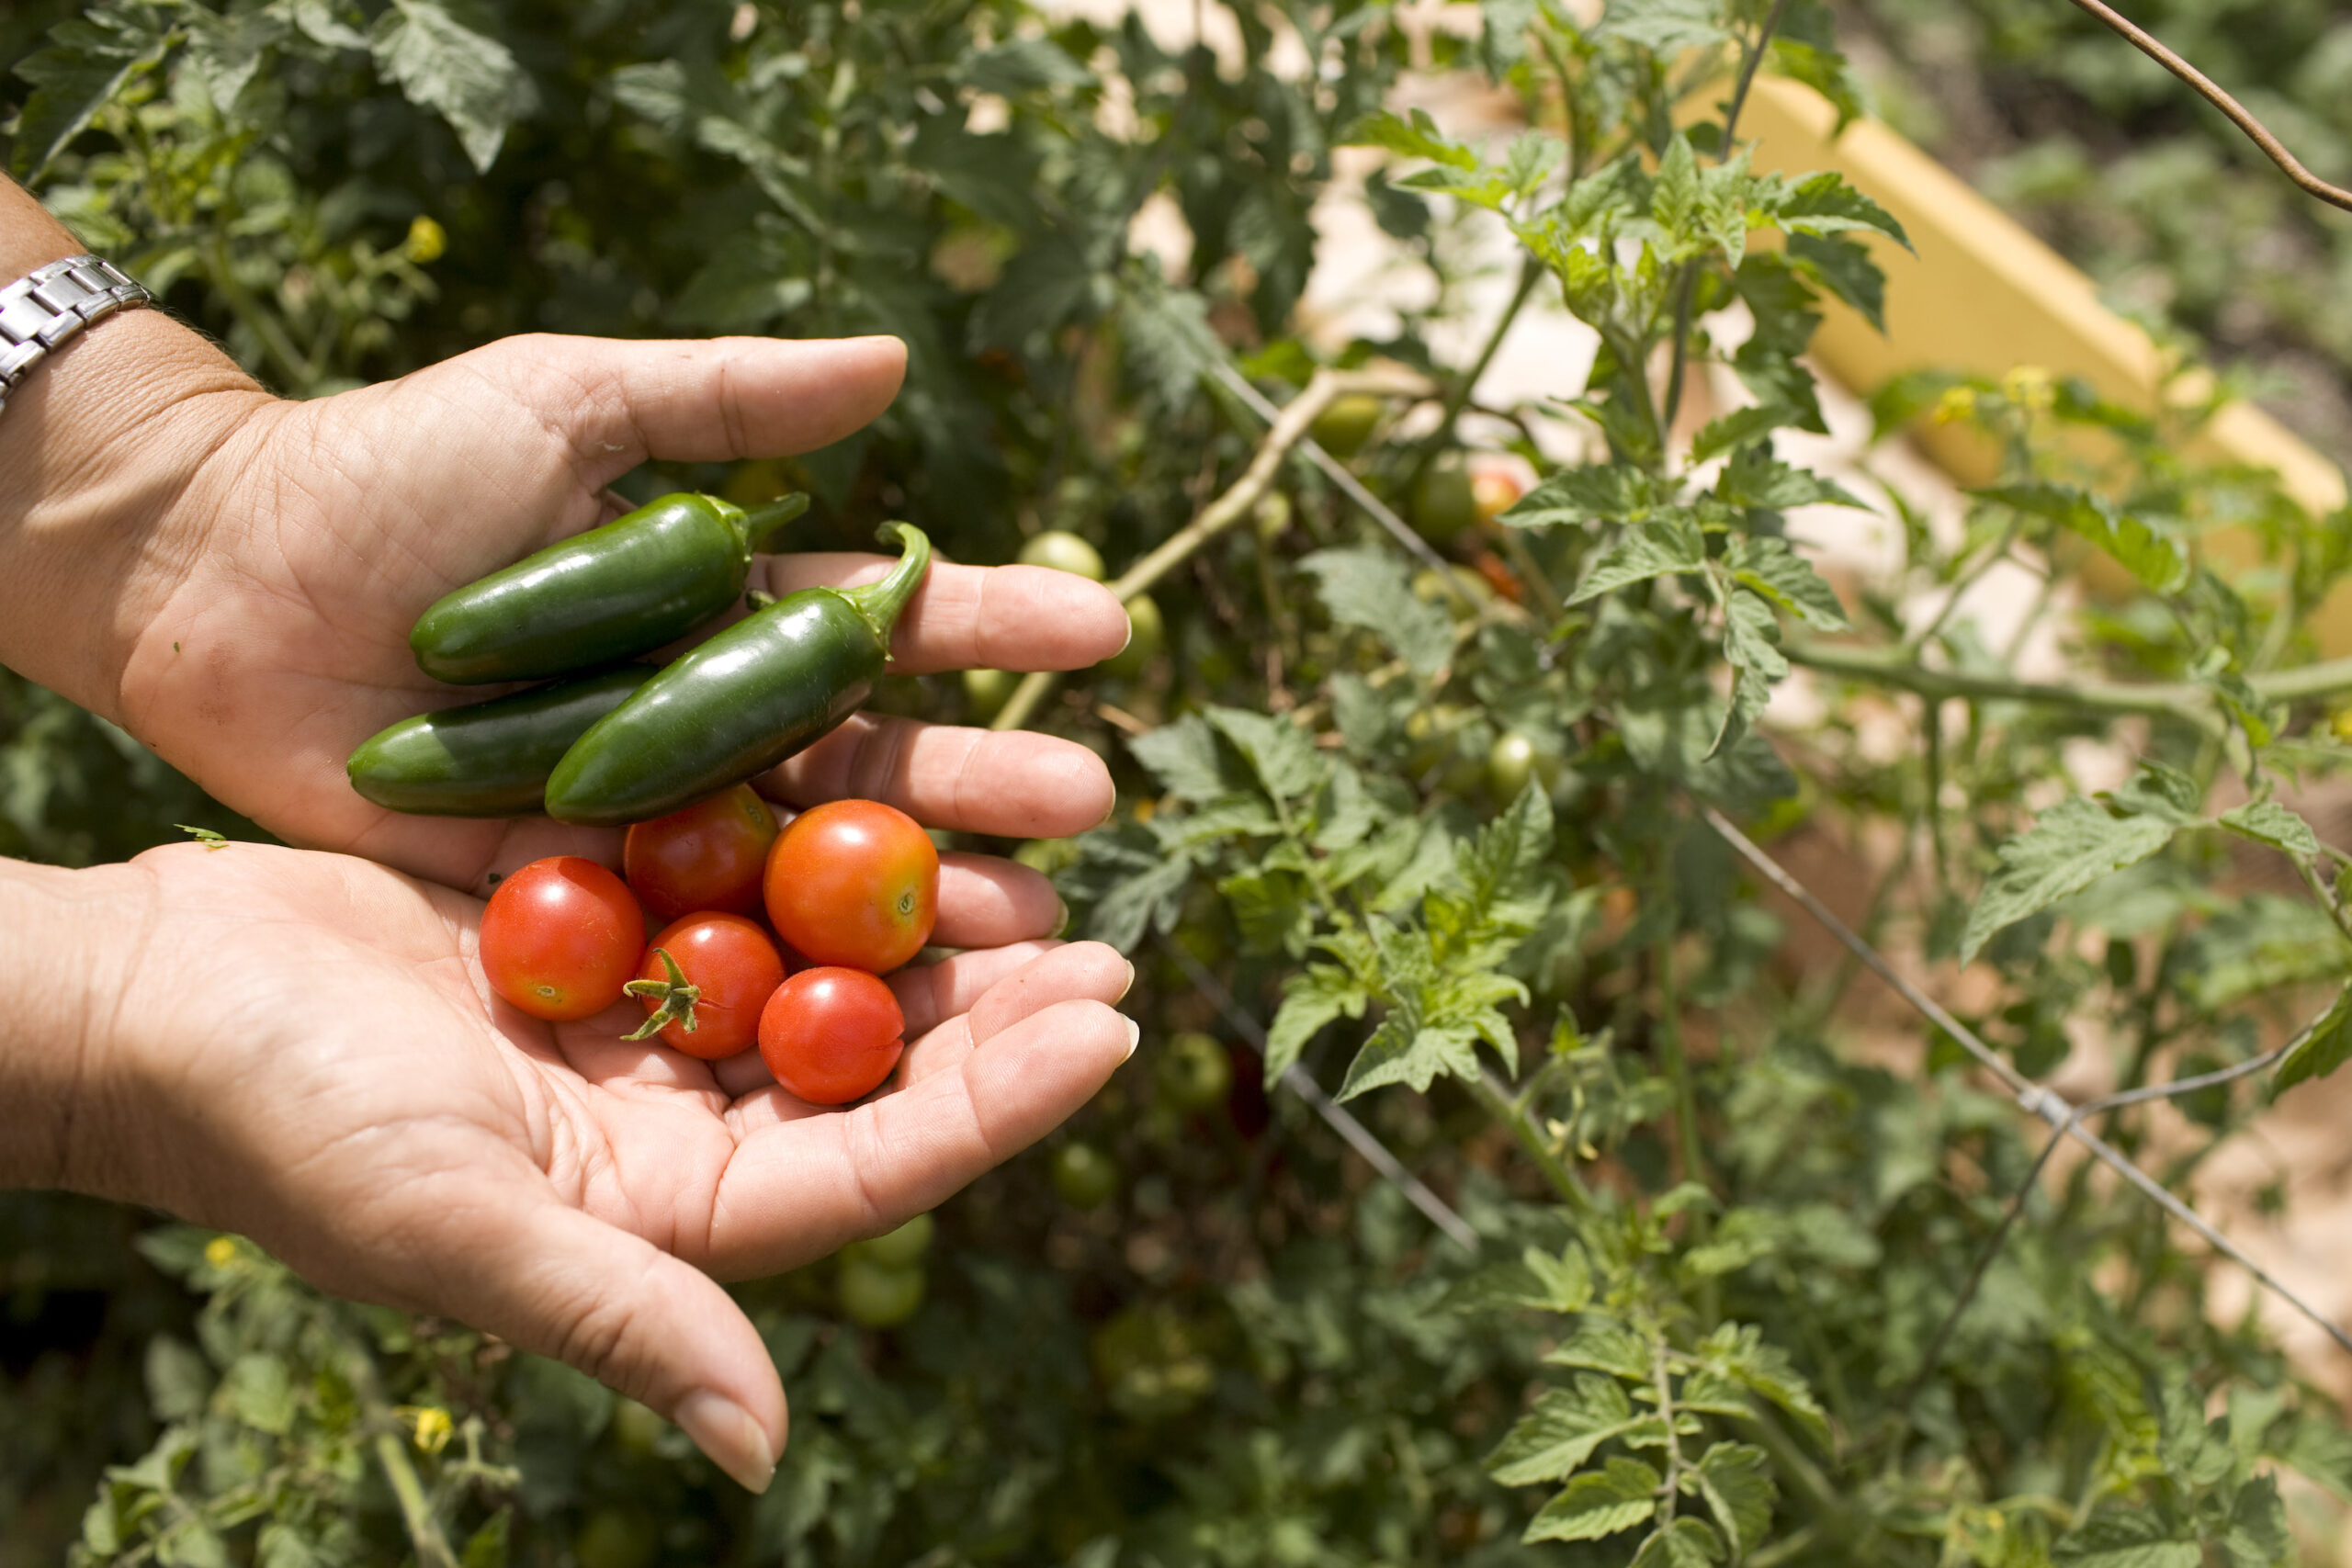 Gardening Growing Food Vegetables Outside Hands Plants Tomatoes Peppers